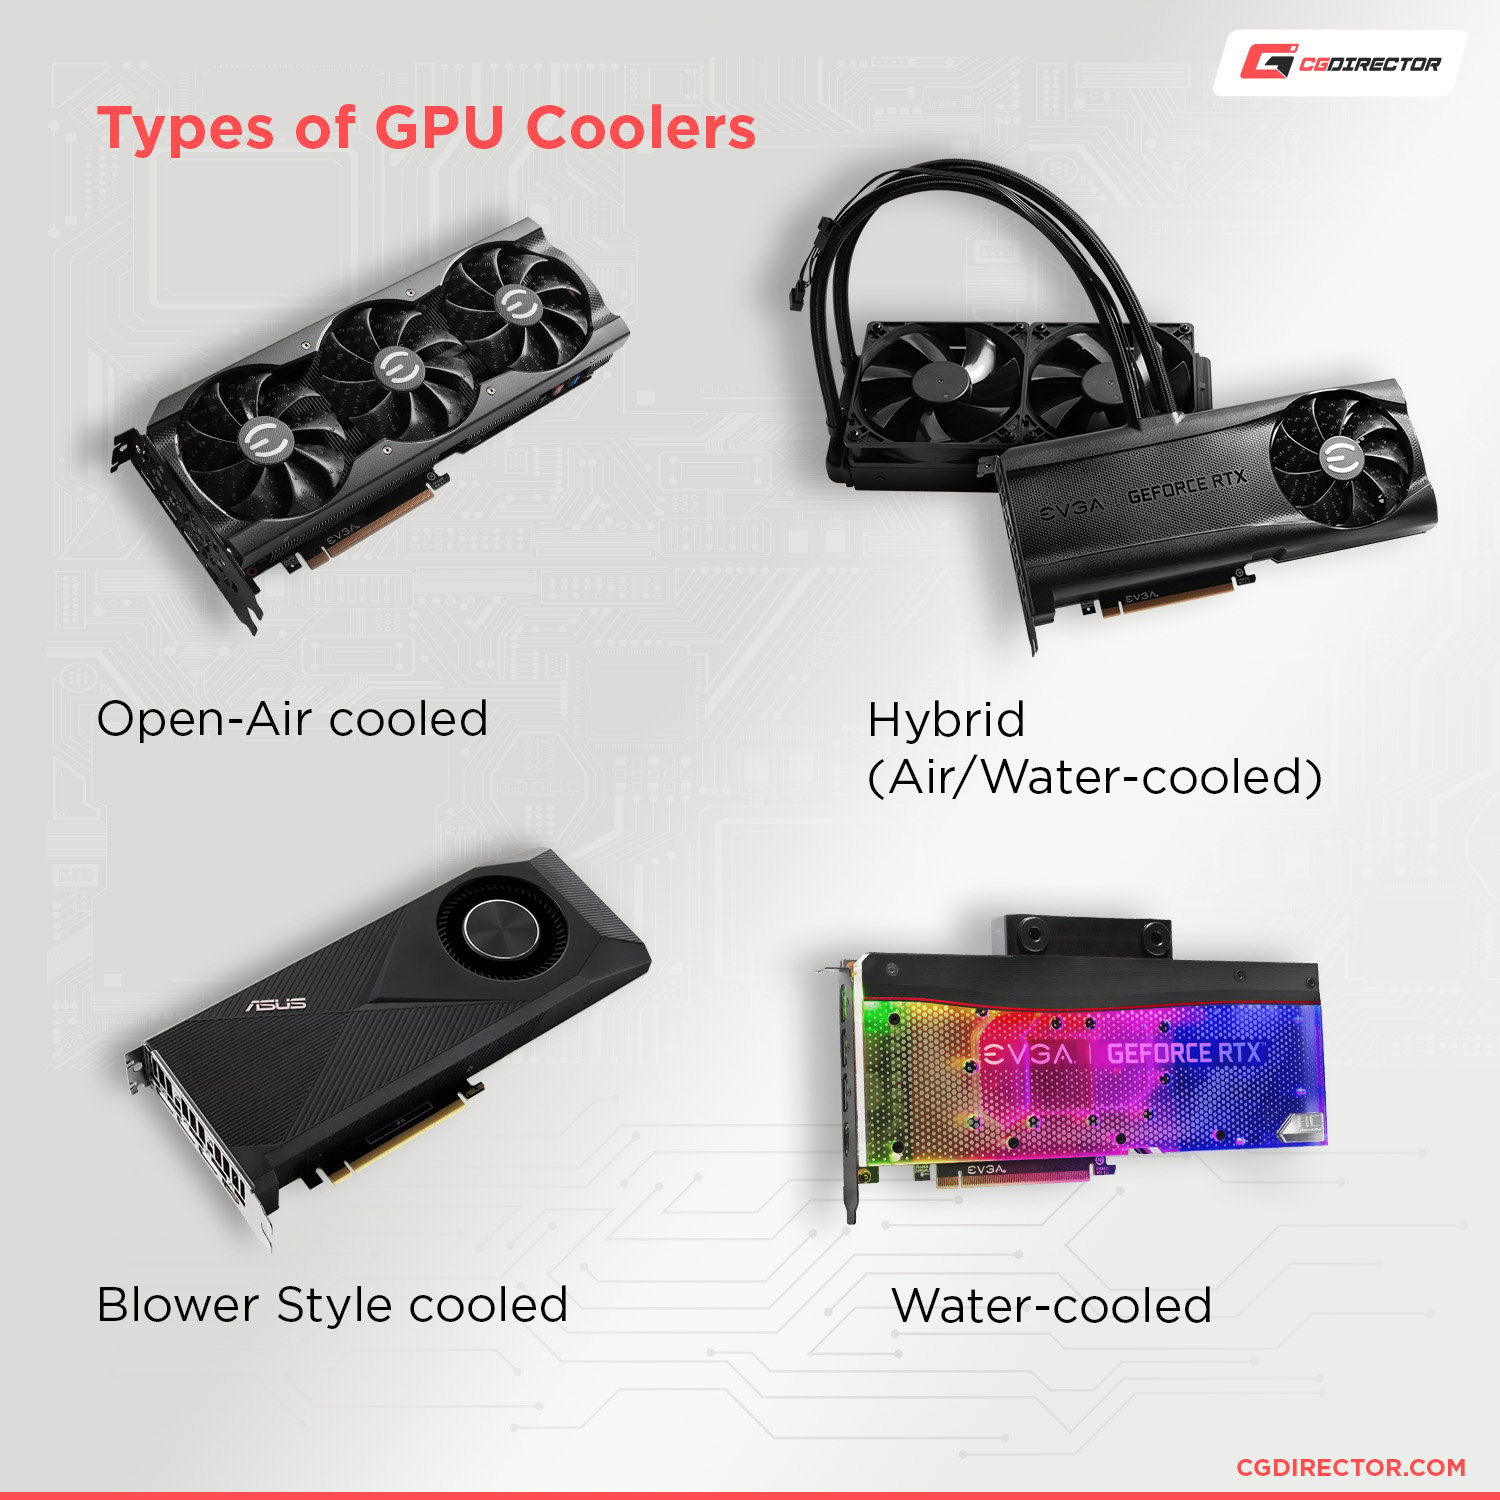 How Hot is Too Hot for a GPU? - Graphics Card Temperature Guide